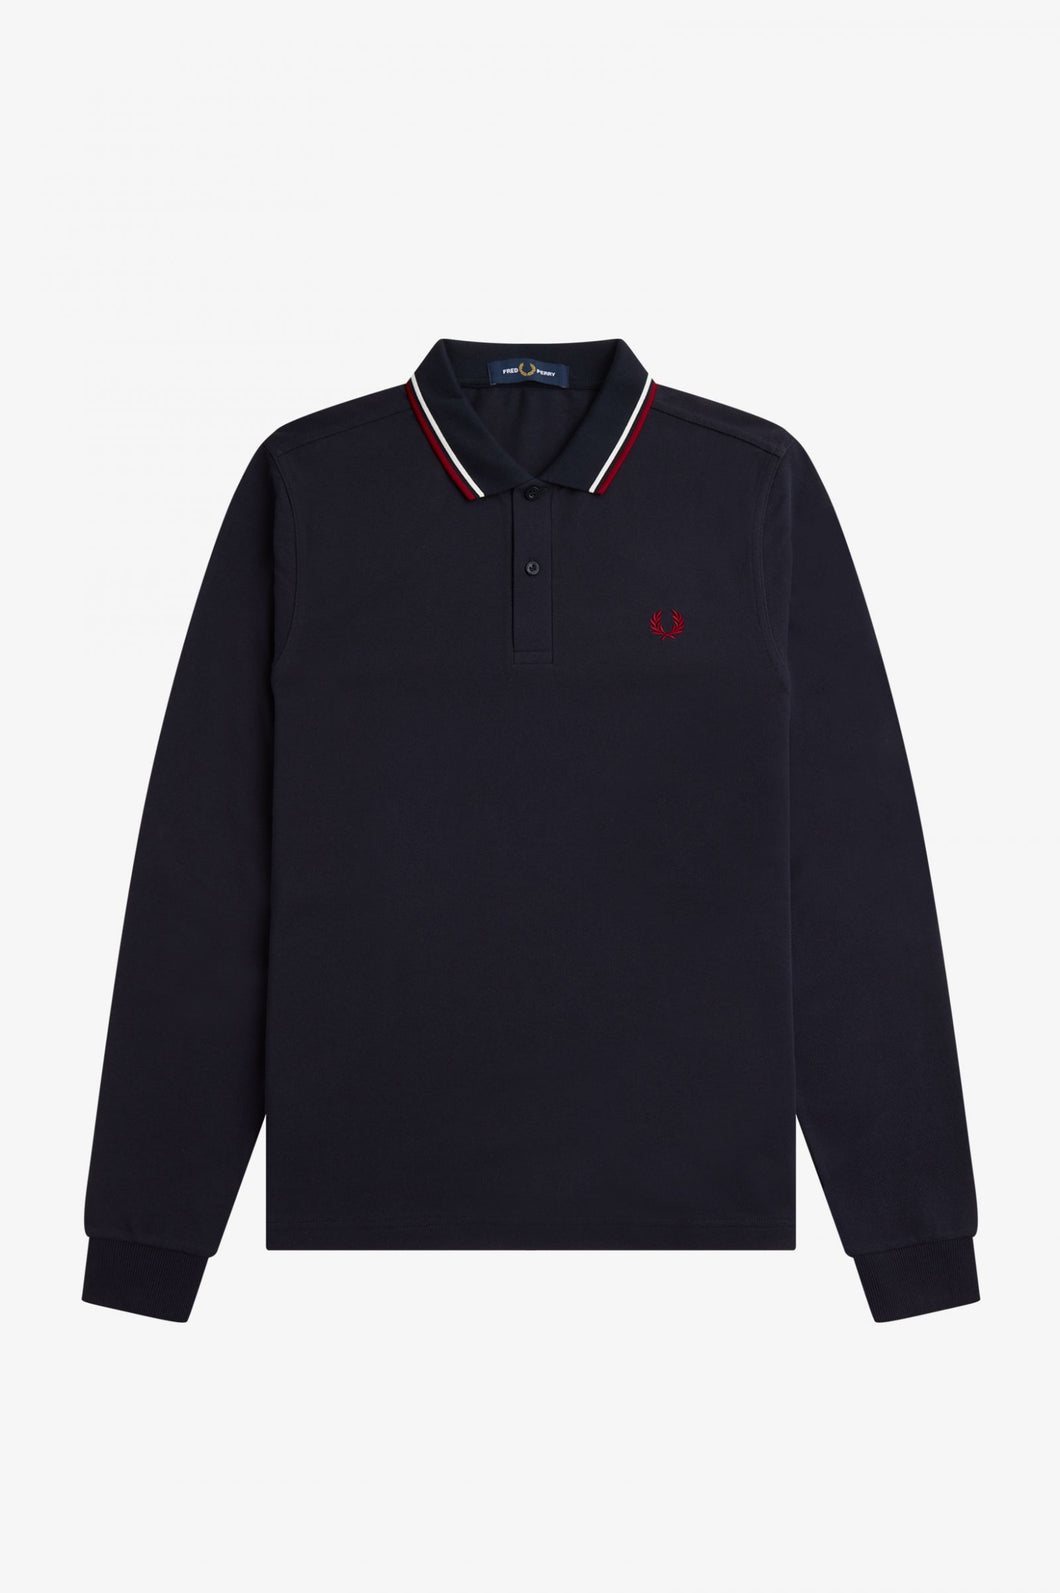 Fred Perry Navy Blue Long Sleeve Polo with White and Red Twin Tipping